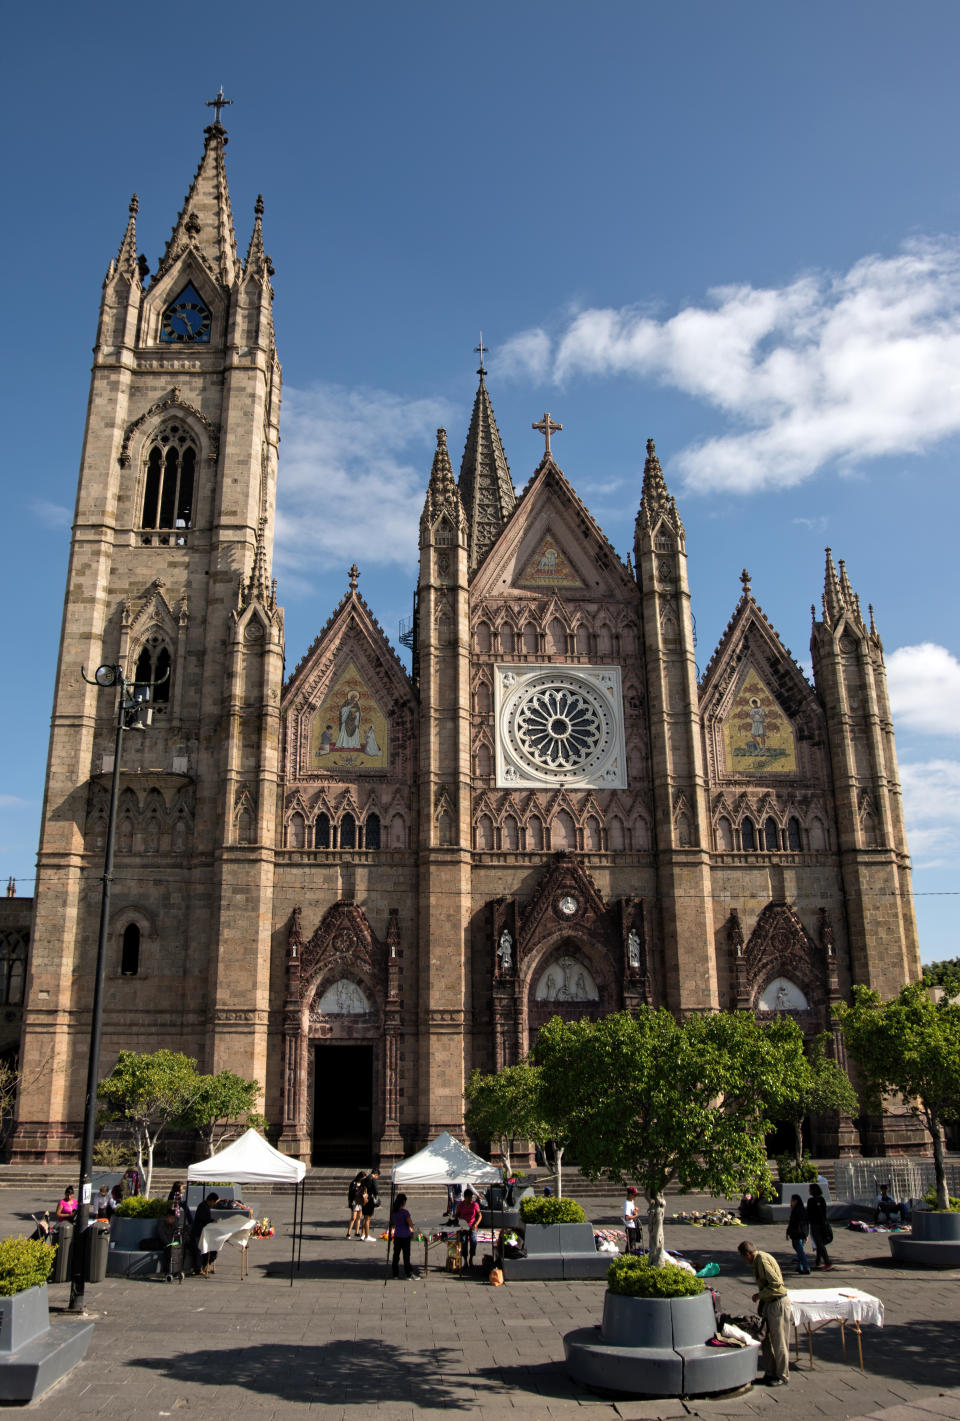 Guadalajara, Jalisco, Mexico - September 22, 2019: In the foreground, people can be seen at outdoor market stalls in Parque Expiatorio in front of the Church of the Atonement (Templo Expiatorio del Santísimo Sacramento). The church was built in the neo-gothic architecture style over the course of 75 years (1897-1972).